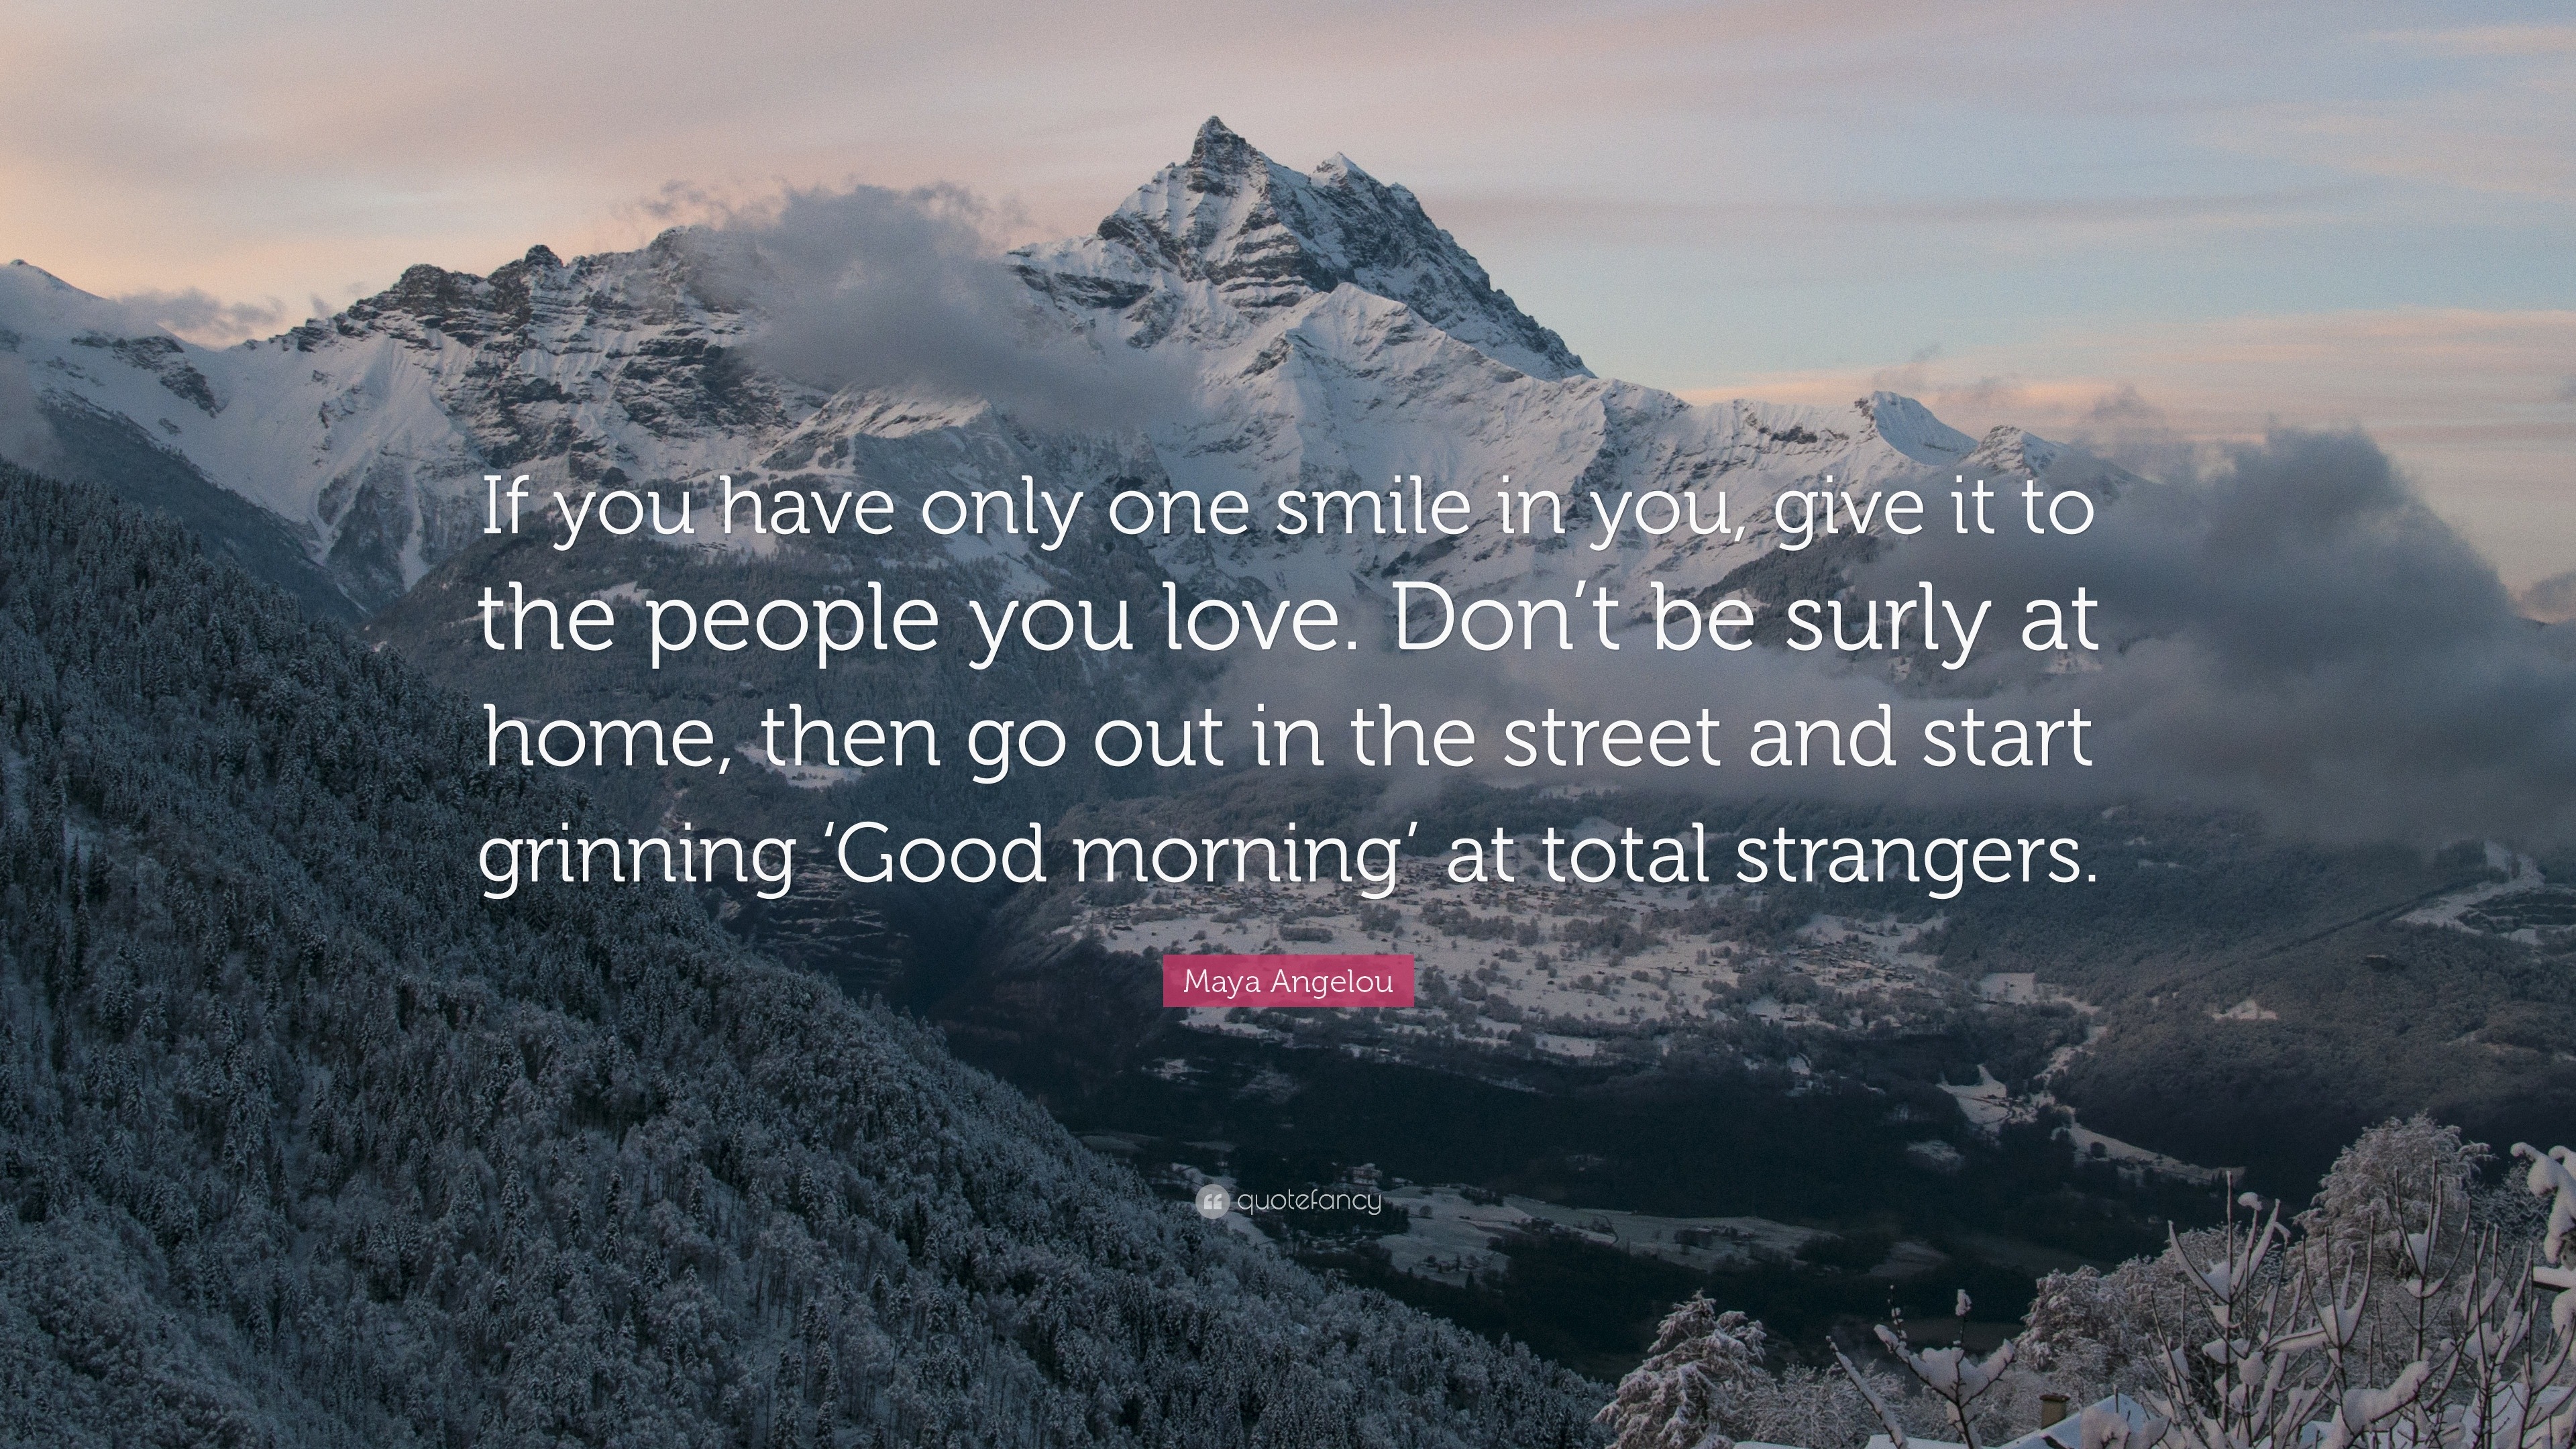 46587-Maya-Angelou-Quote-If-you-have-only-one-smile-in-you-give-it-to.jpg